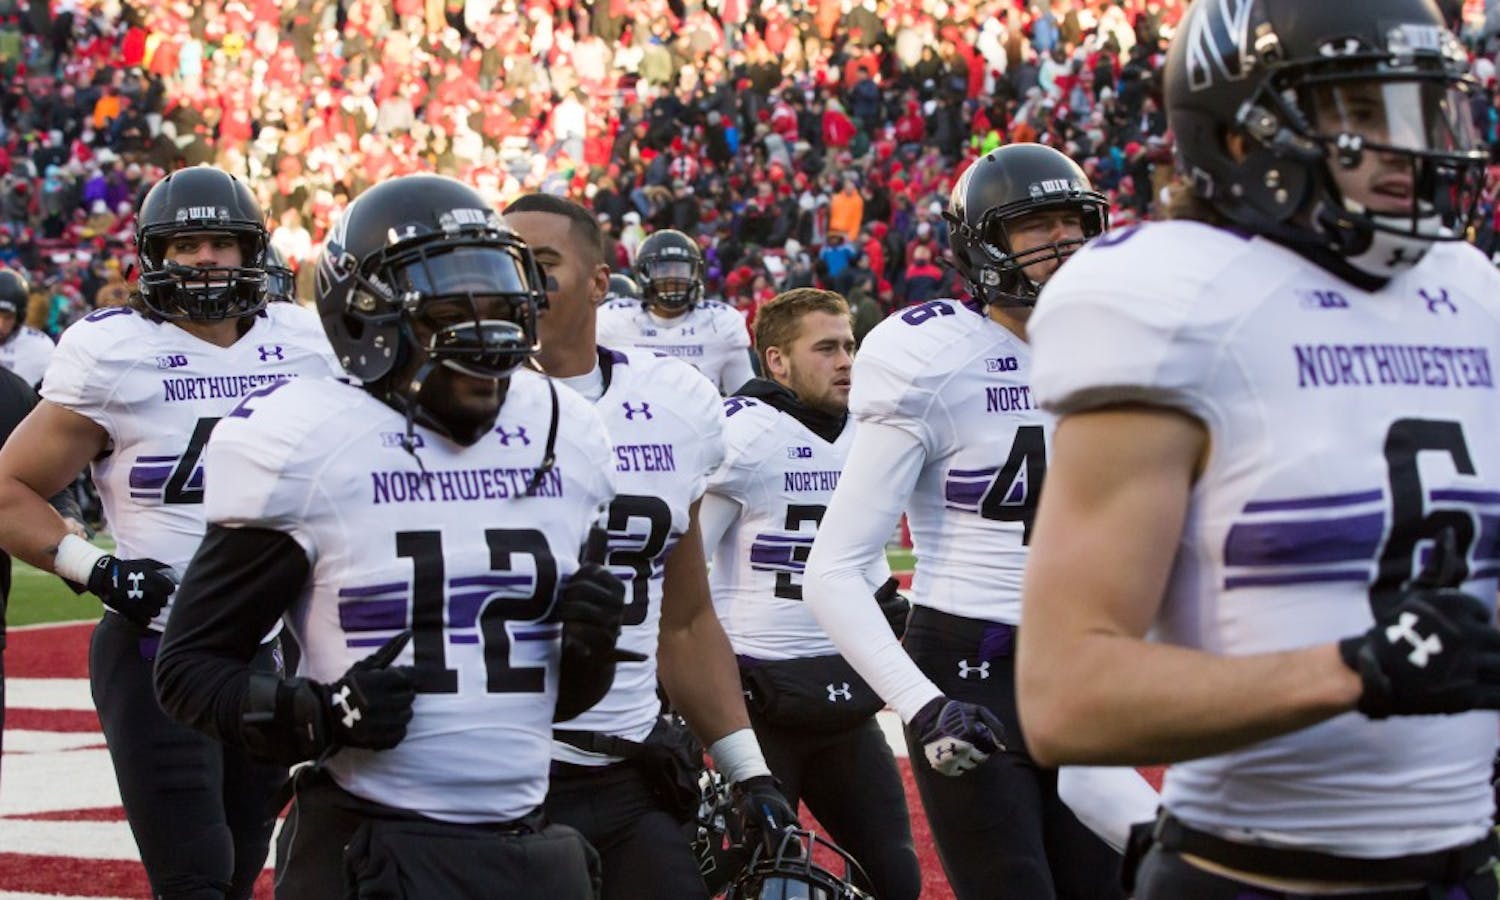 Northwestern looks to put together a complete game against UW as it heads to Madison this weekend.&nbsp;